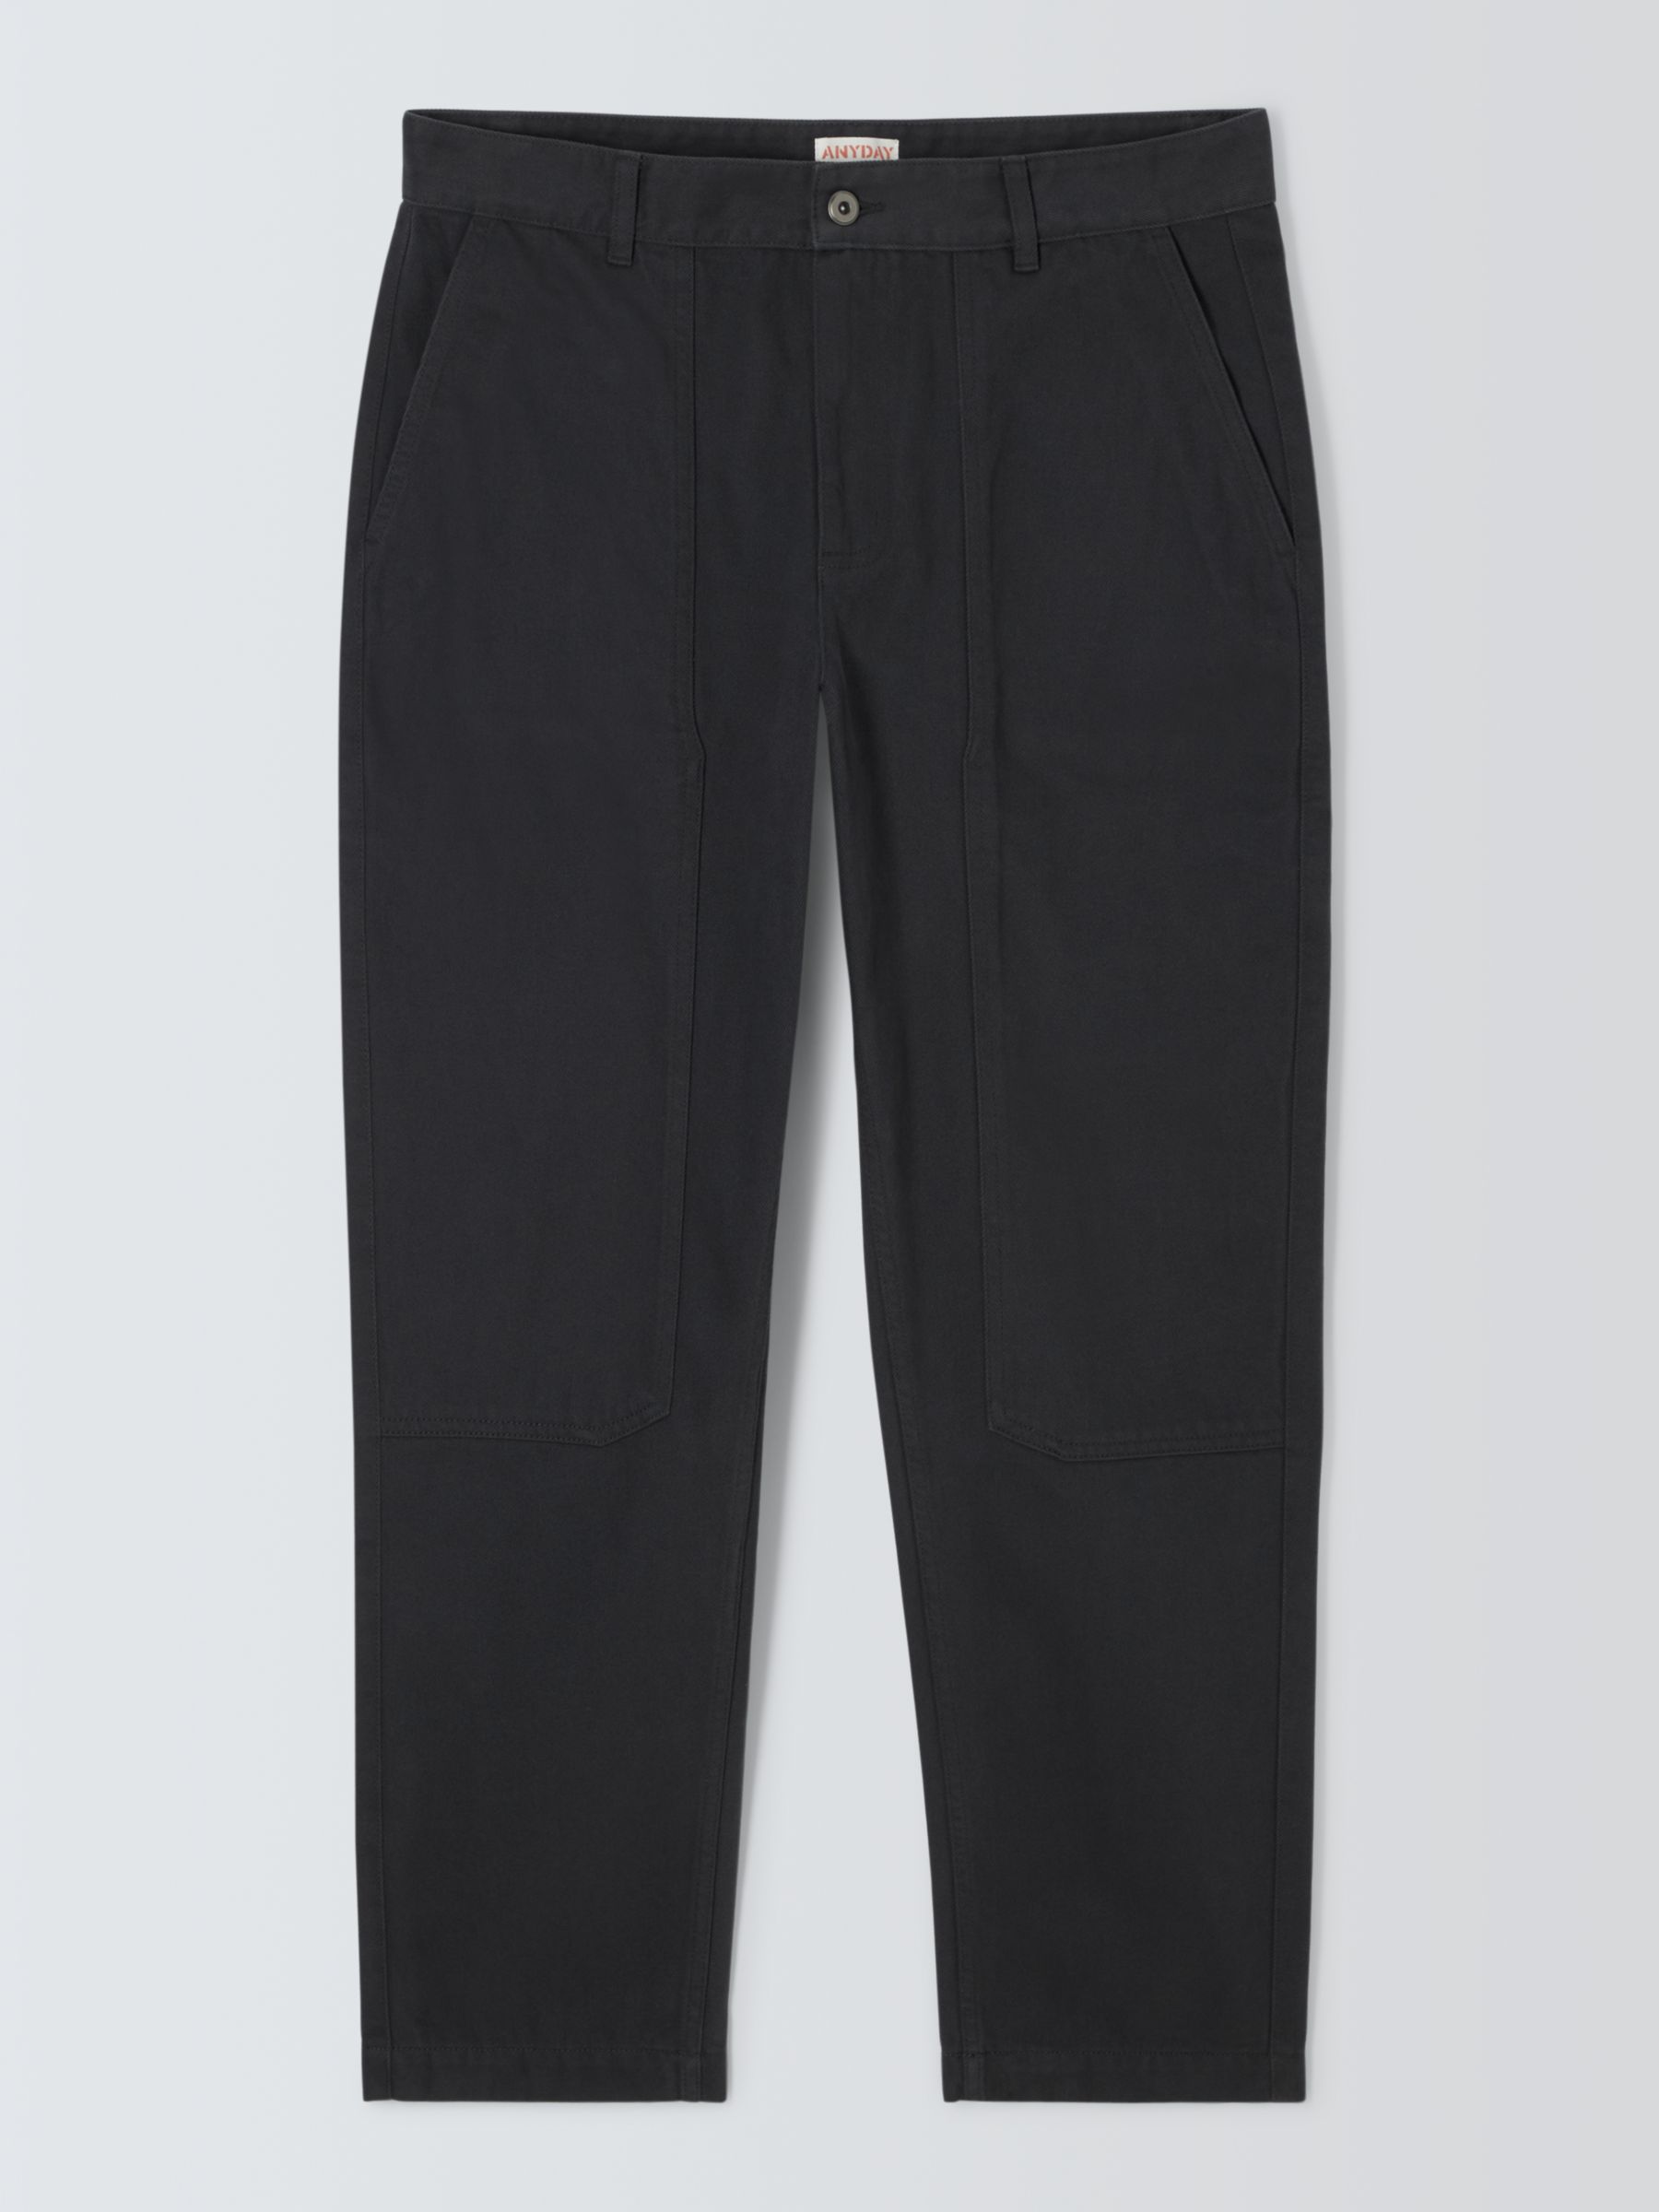 Buy John Lewis ANYDAY Double Knee Trousers, Grey Online at johnlewis.com